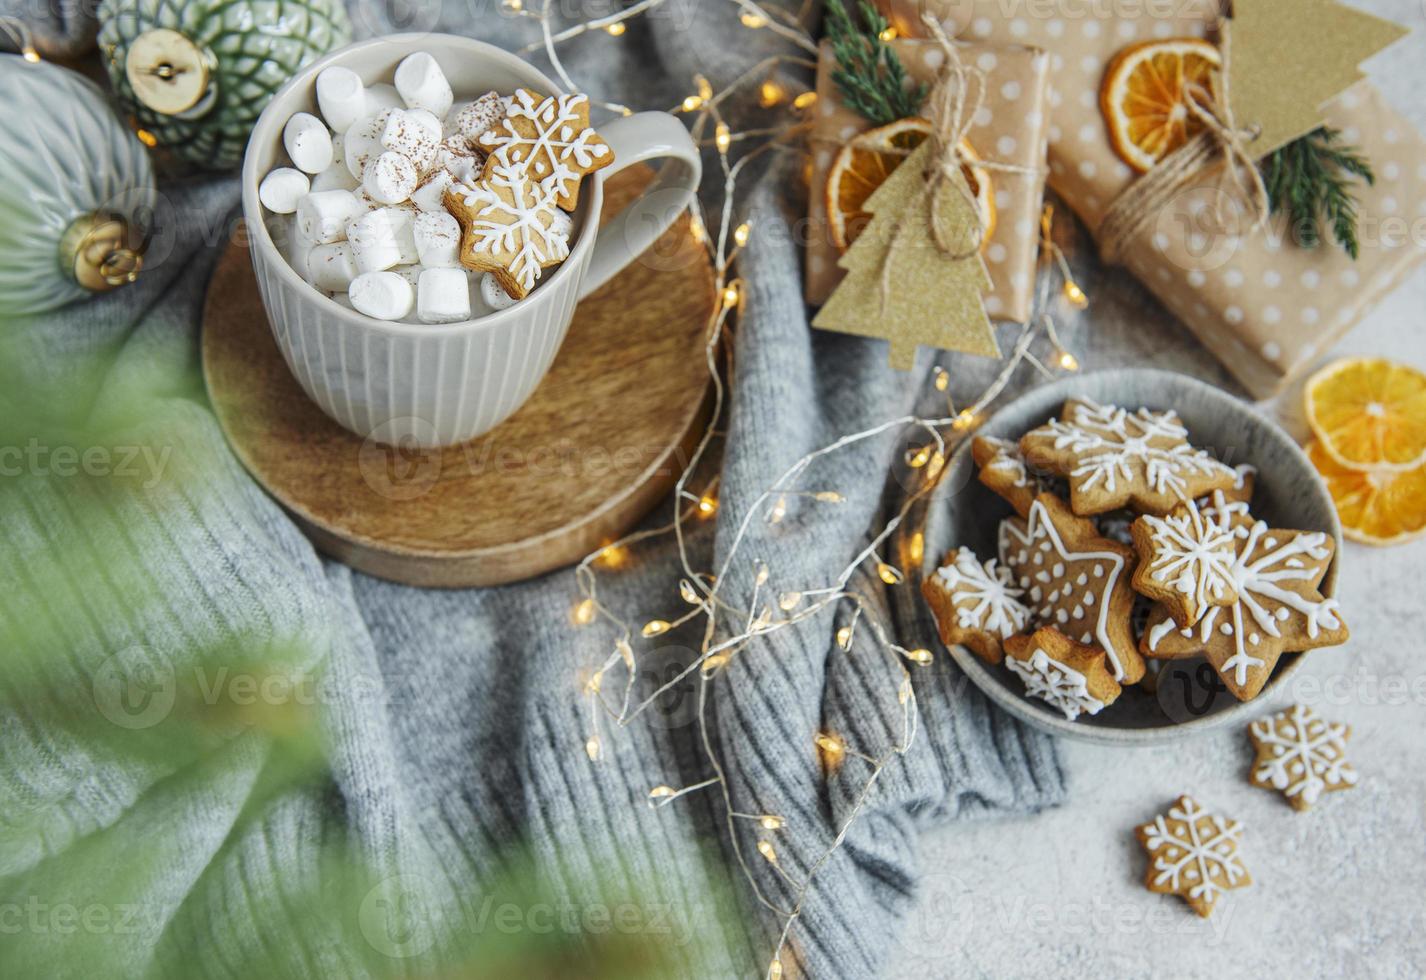 Hot chocolate with marshmallows, warm cozy Christmas drink photo